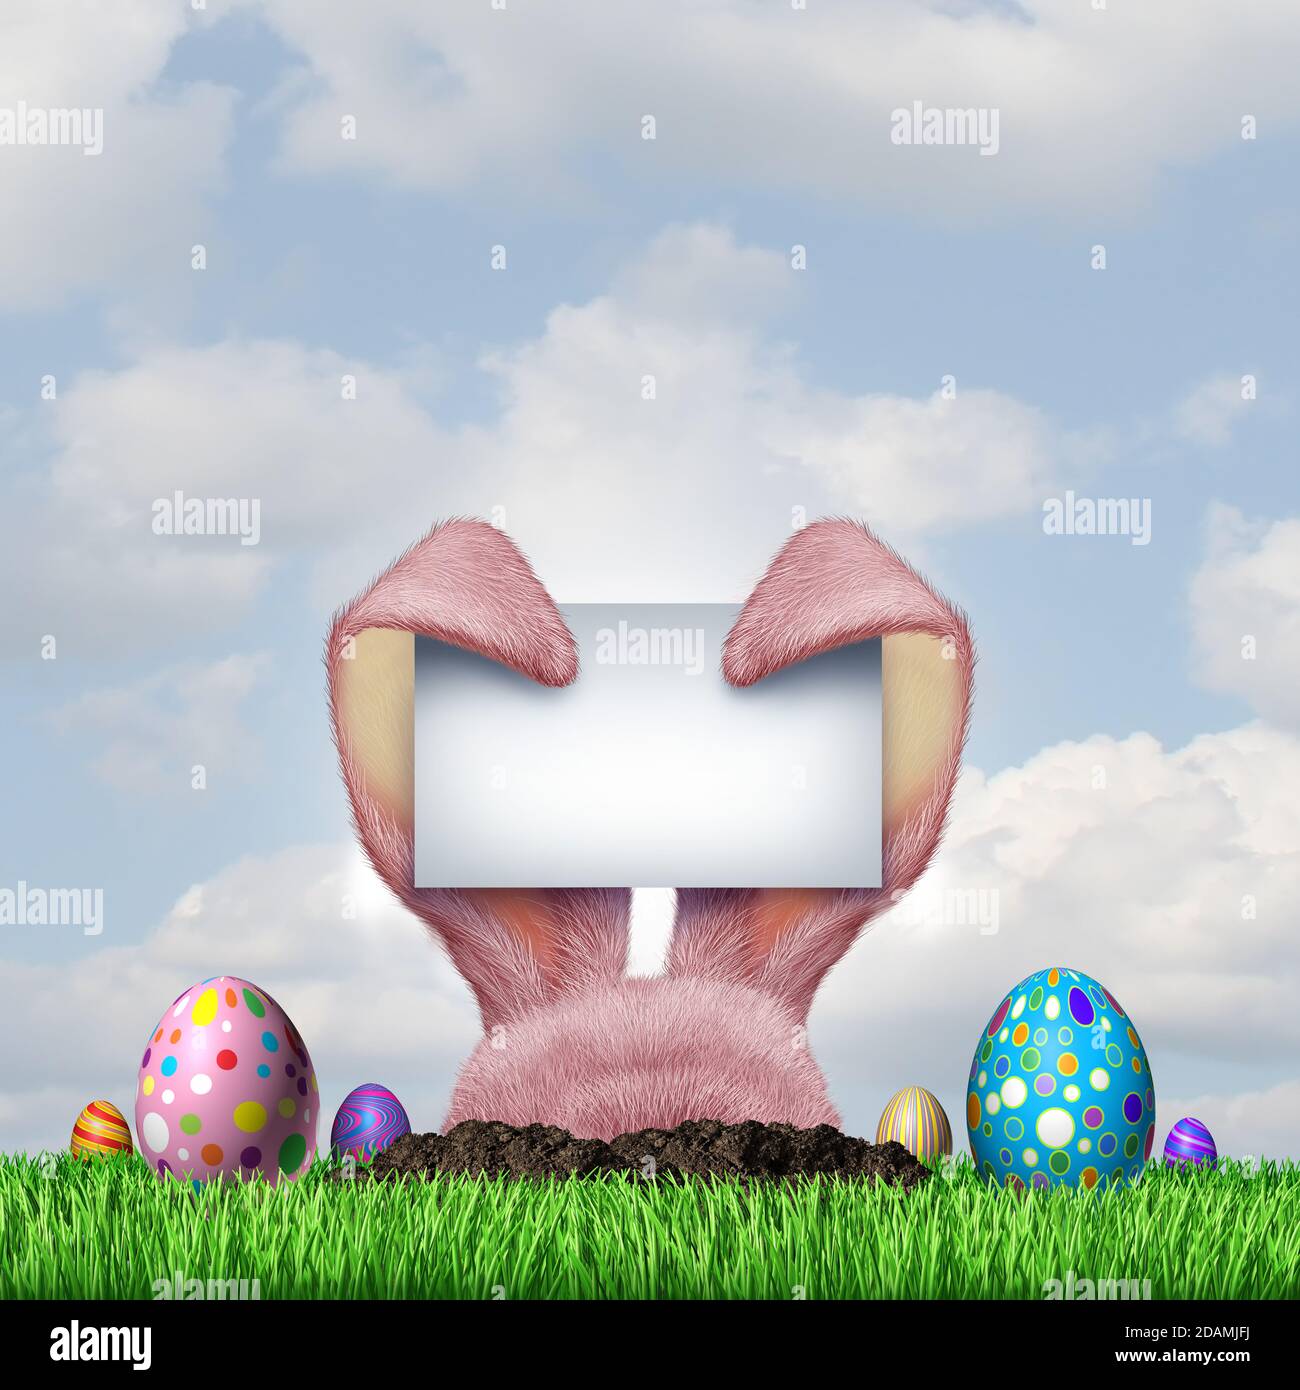 Easter bunny egg hunt blank sign and happy spring holiday as a funny april celebration with decorated eggs on grass. Stock Photo